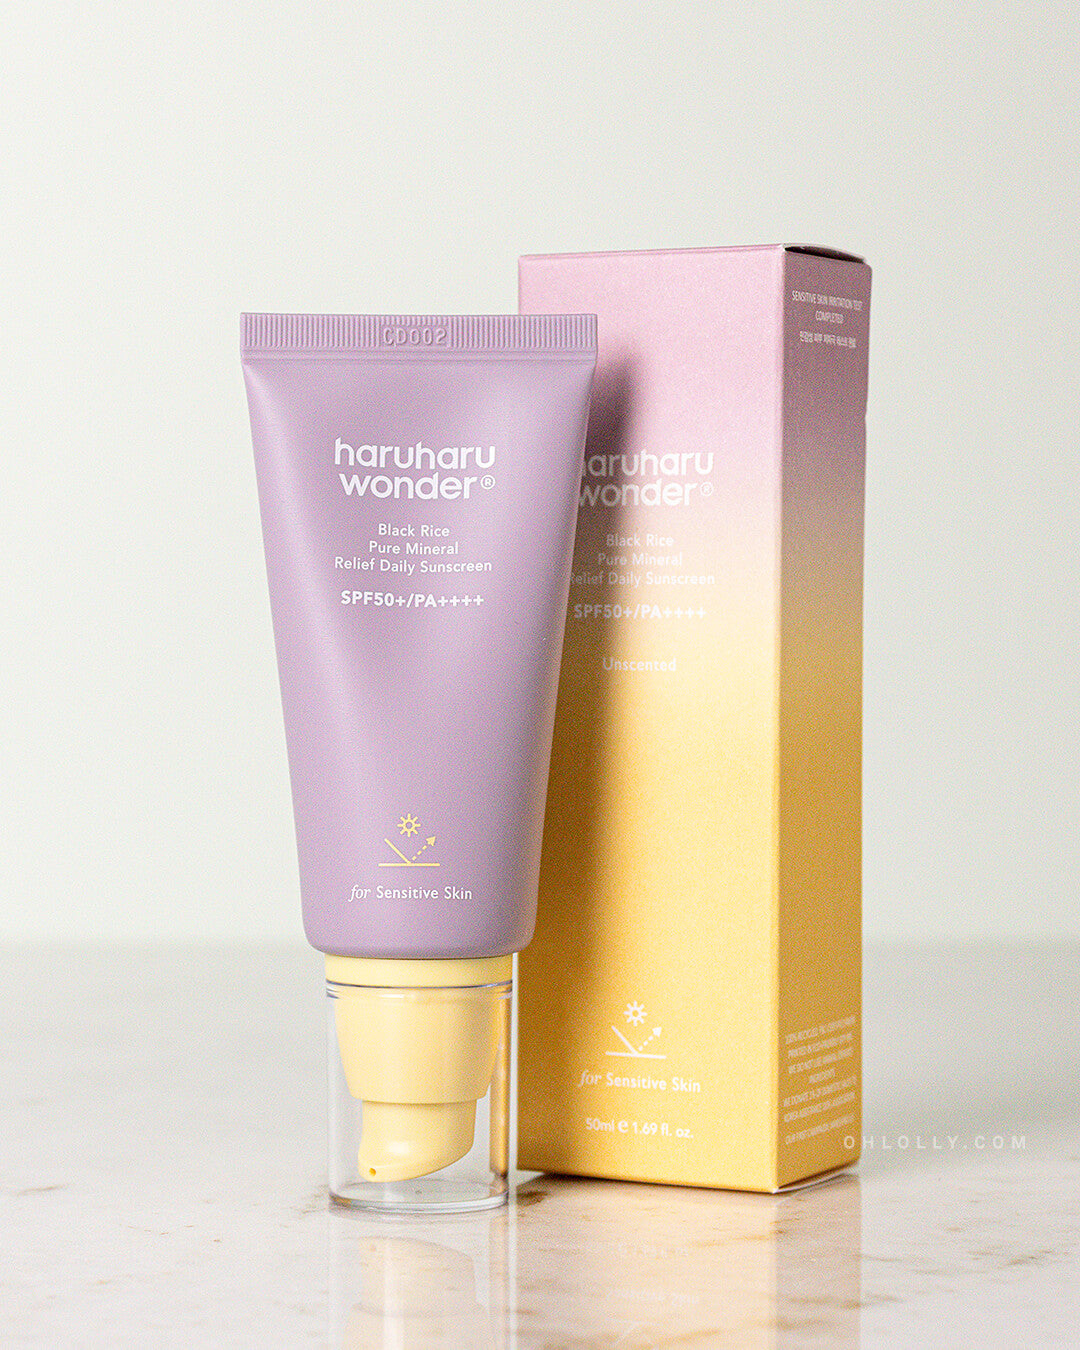 Ohlolly Korean Skincare Haruharu Wonder Black Rice Pure Mineral Relief Daily Sunscreen